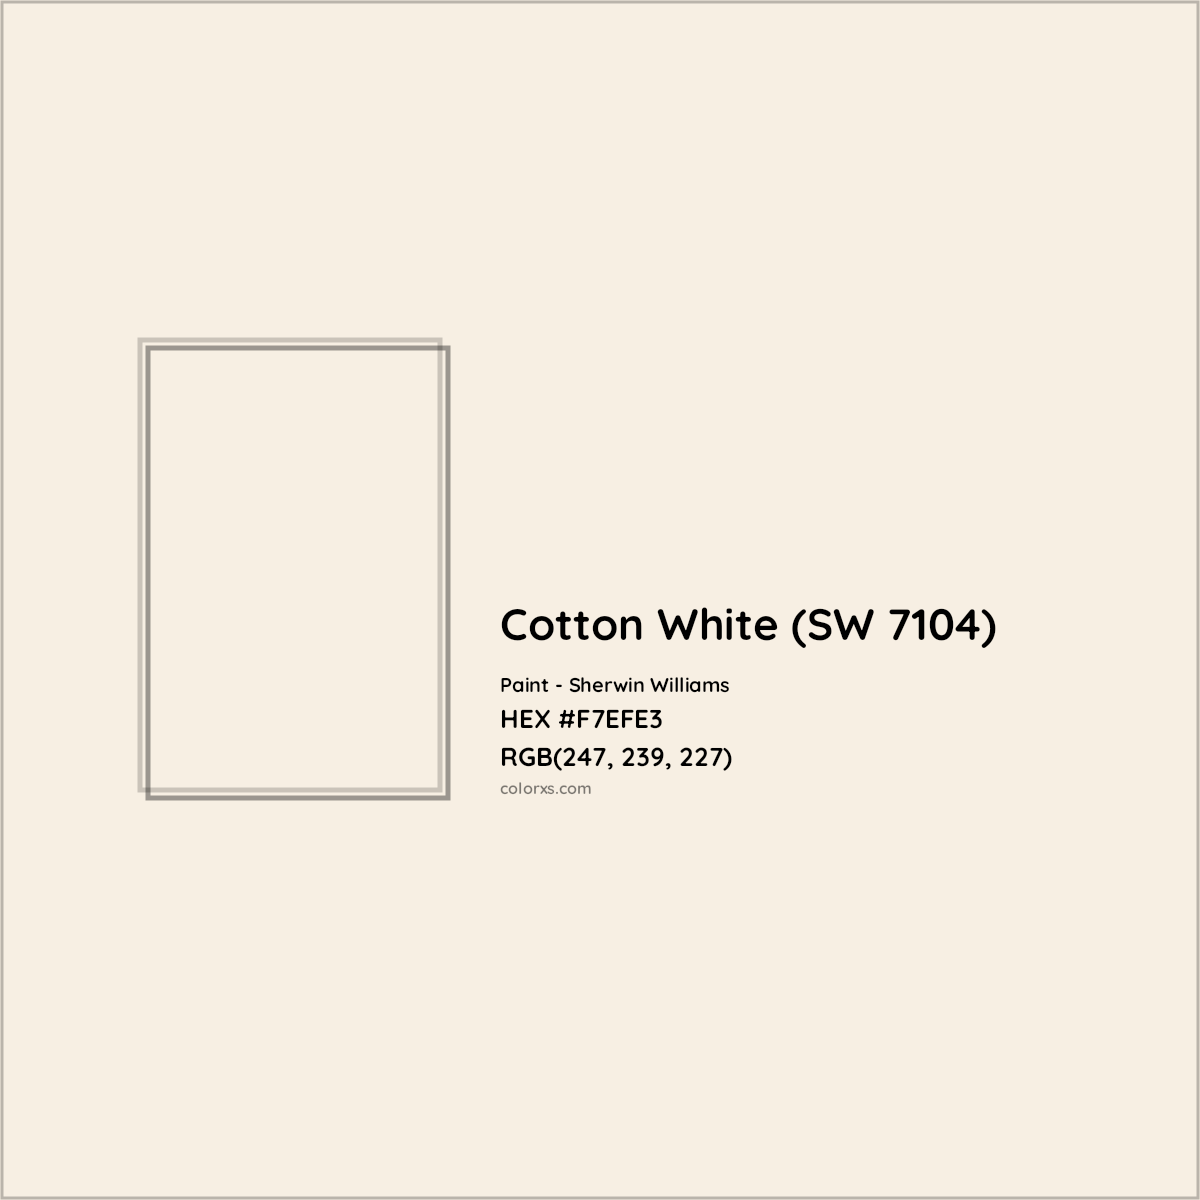 HEX #F7EFE3 Cotton White (SW 7104) Paint Sherwin Williams - Color Code